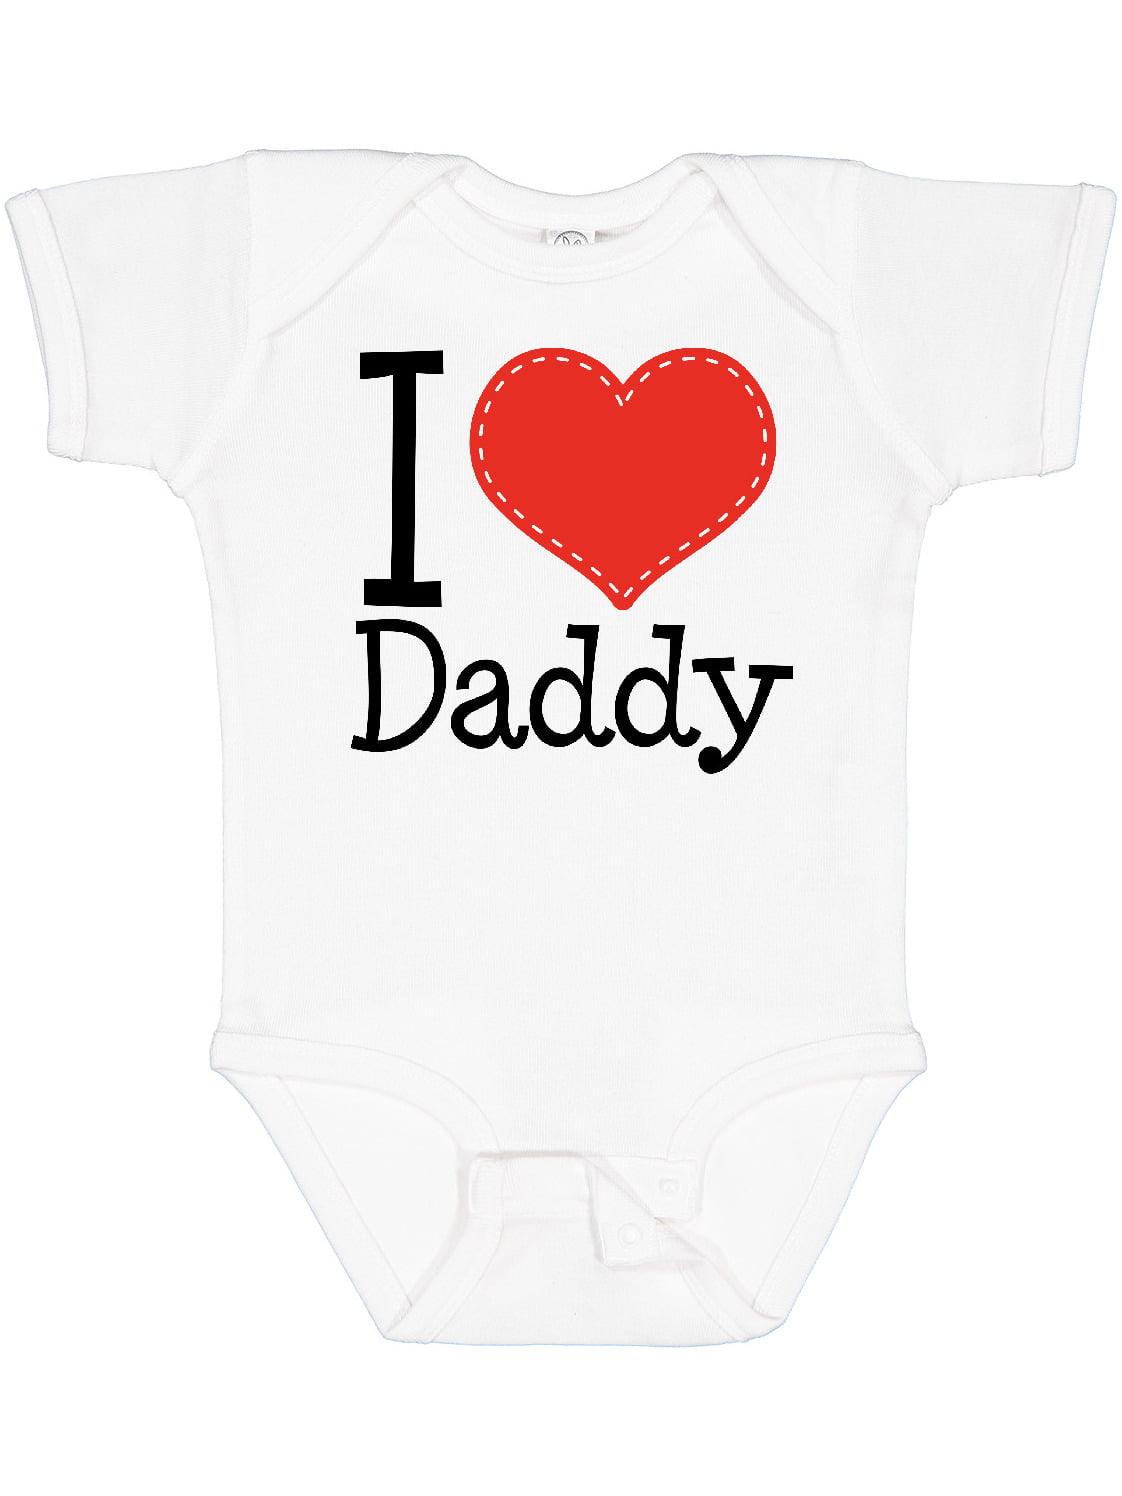 Custom Baby Bodysuit Black Moms Dads Creation Red Hearts Boy & Girl Clothes